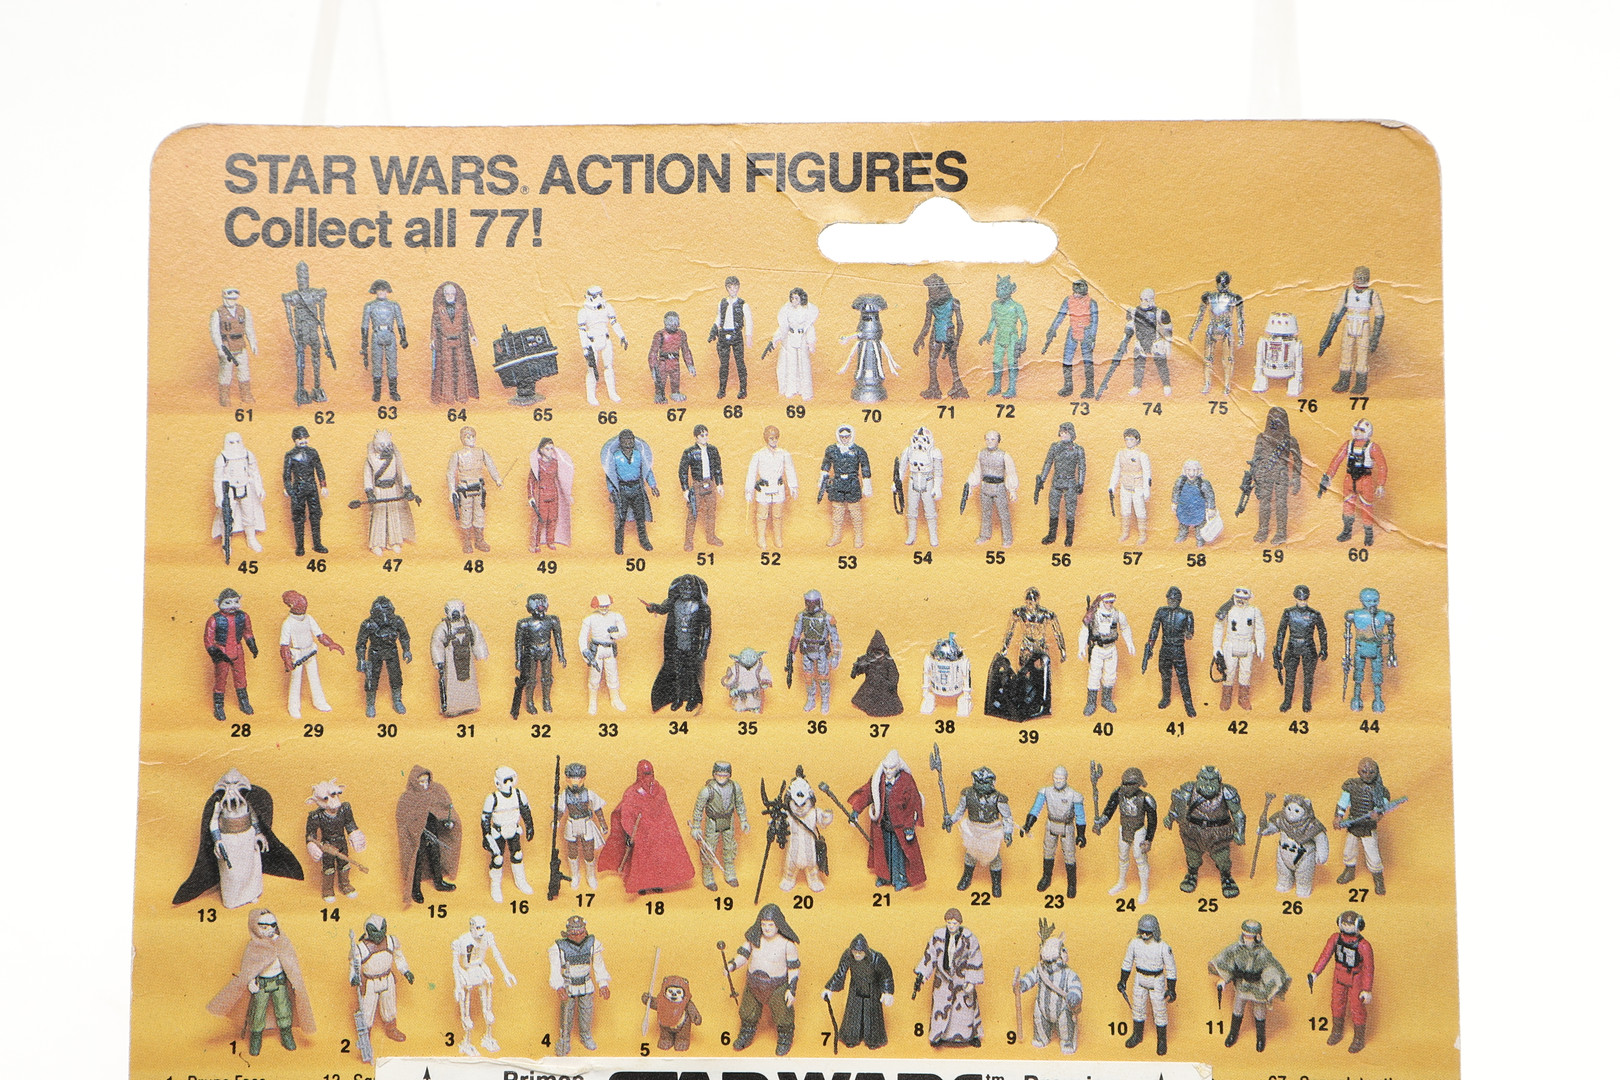 STAR WARS CARDED FIGURES - RETURN OF THE JEDI. - Image 31 of 32